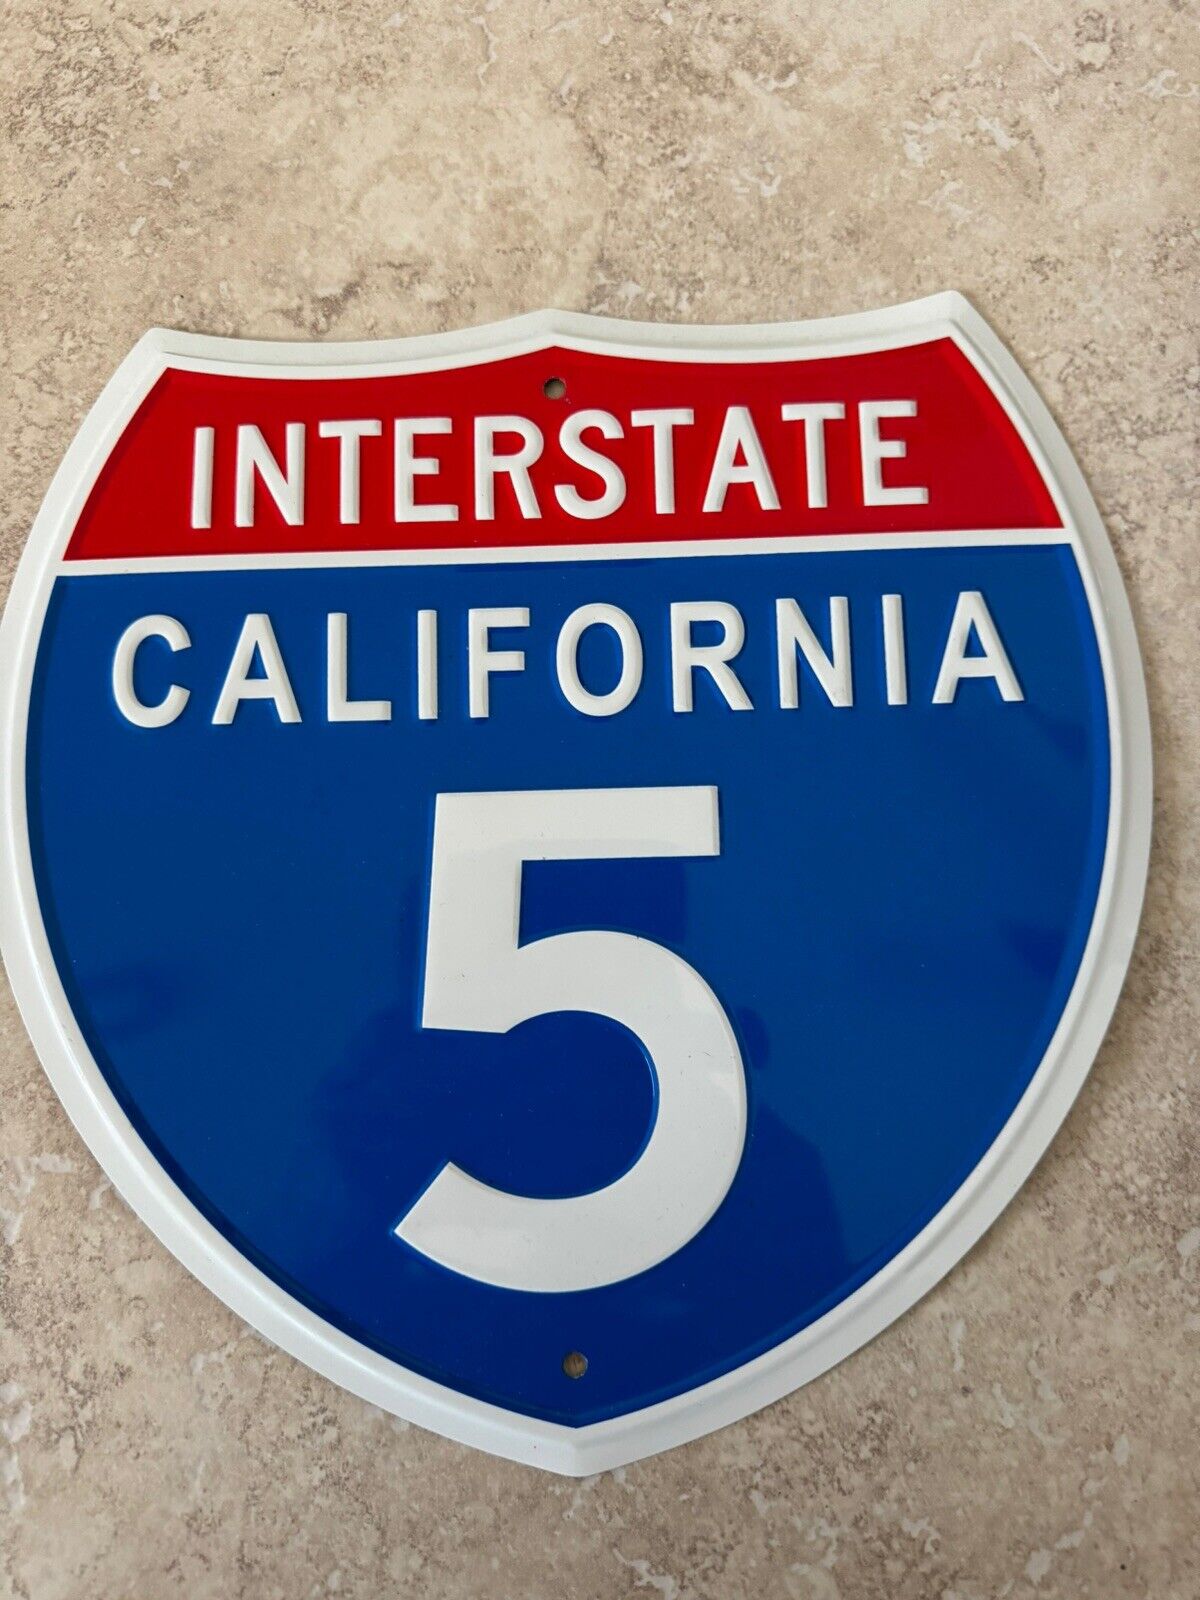 California interstate route 5 highway marker road sign  Los Angeles